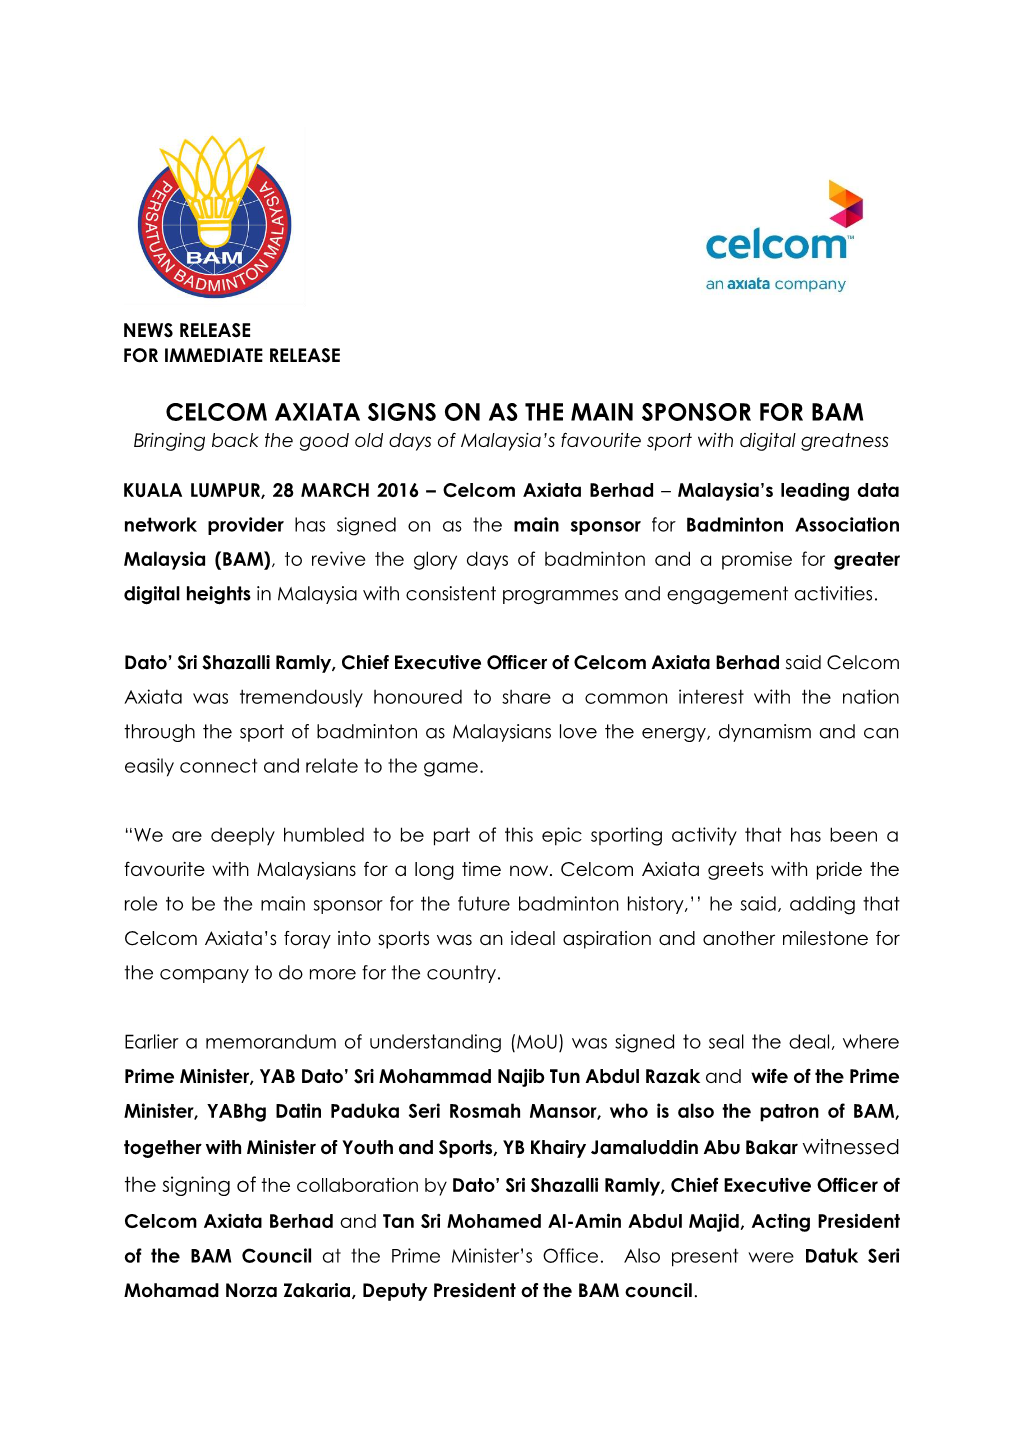 CELCOM AXIATA SIGNS on AS the MAIN SPONSOR for BAM Bringing Back the Good Old Days of Malaysia’S Favourite Sport with Digital Greatness